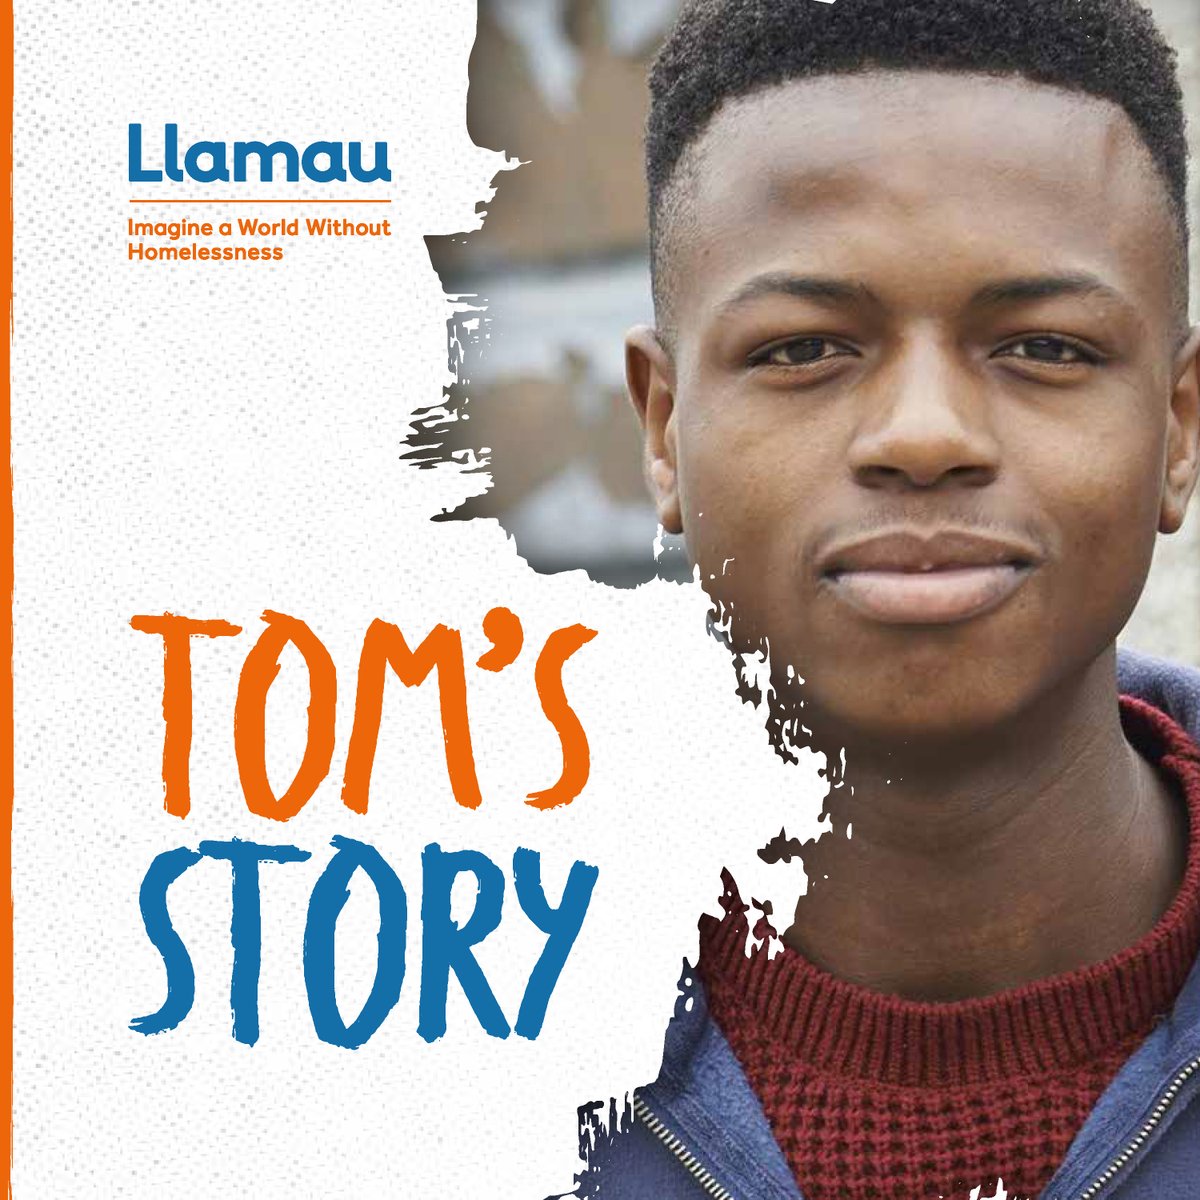 Llamau's Step Into programme supports young people like Tom to pursue their interests and achieve their goals to build an independent future. Read Tom's Story here: ow.ly/2B2I50RiasI